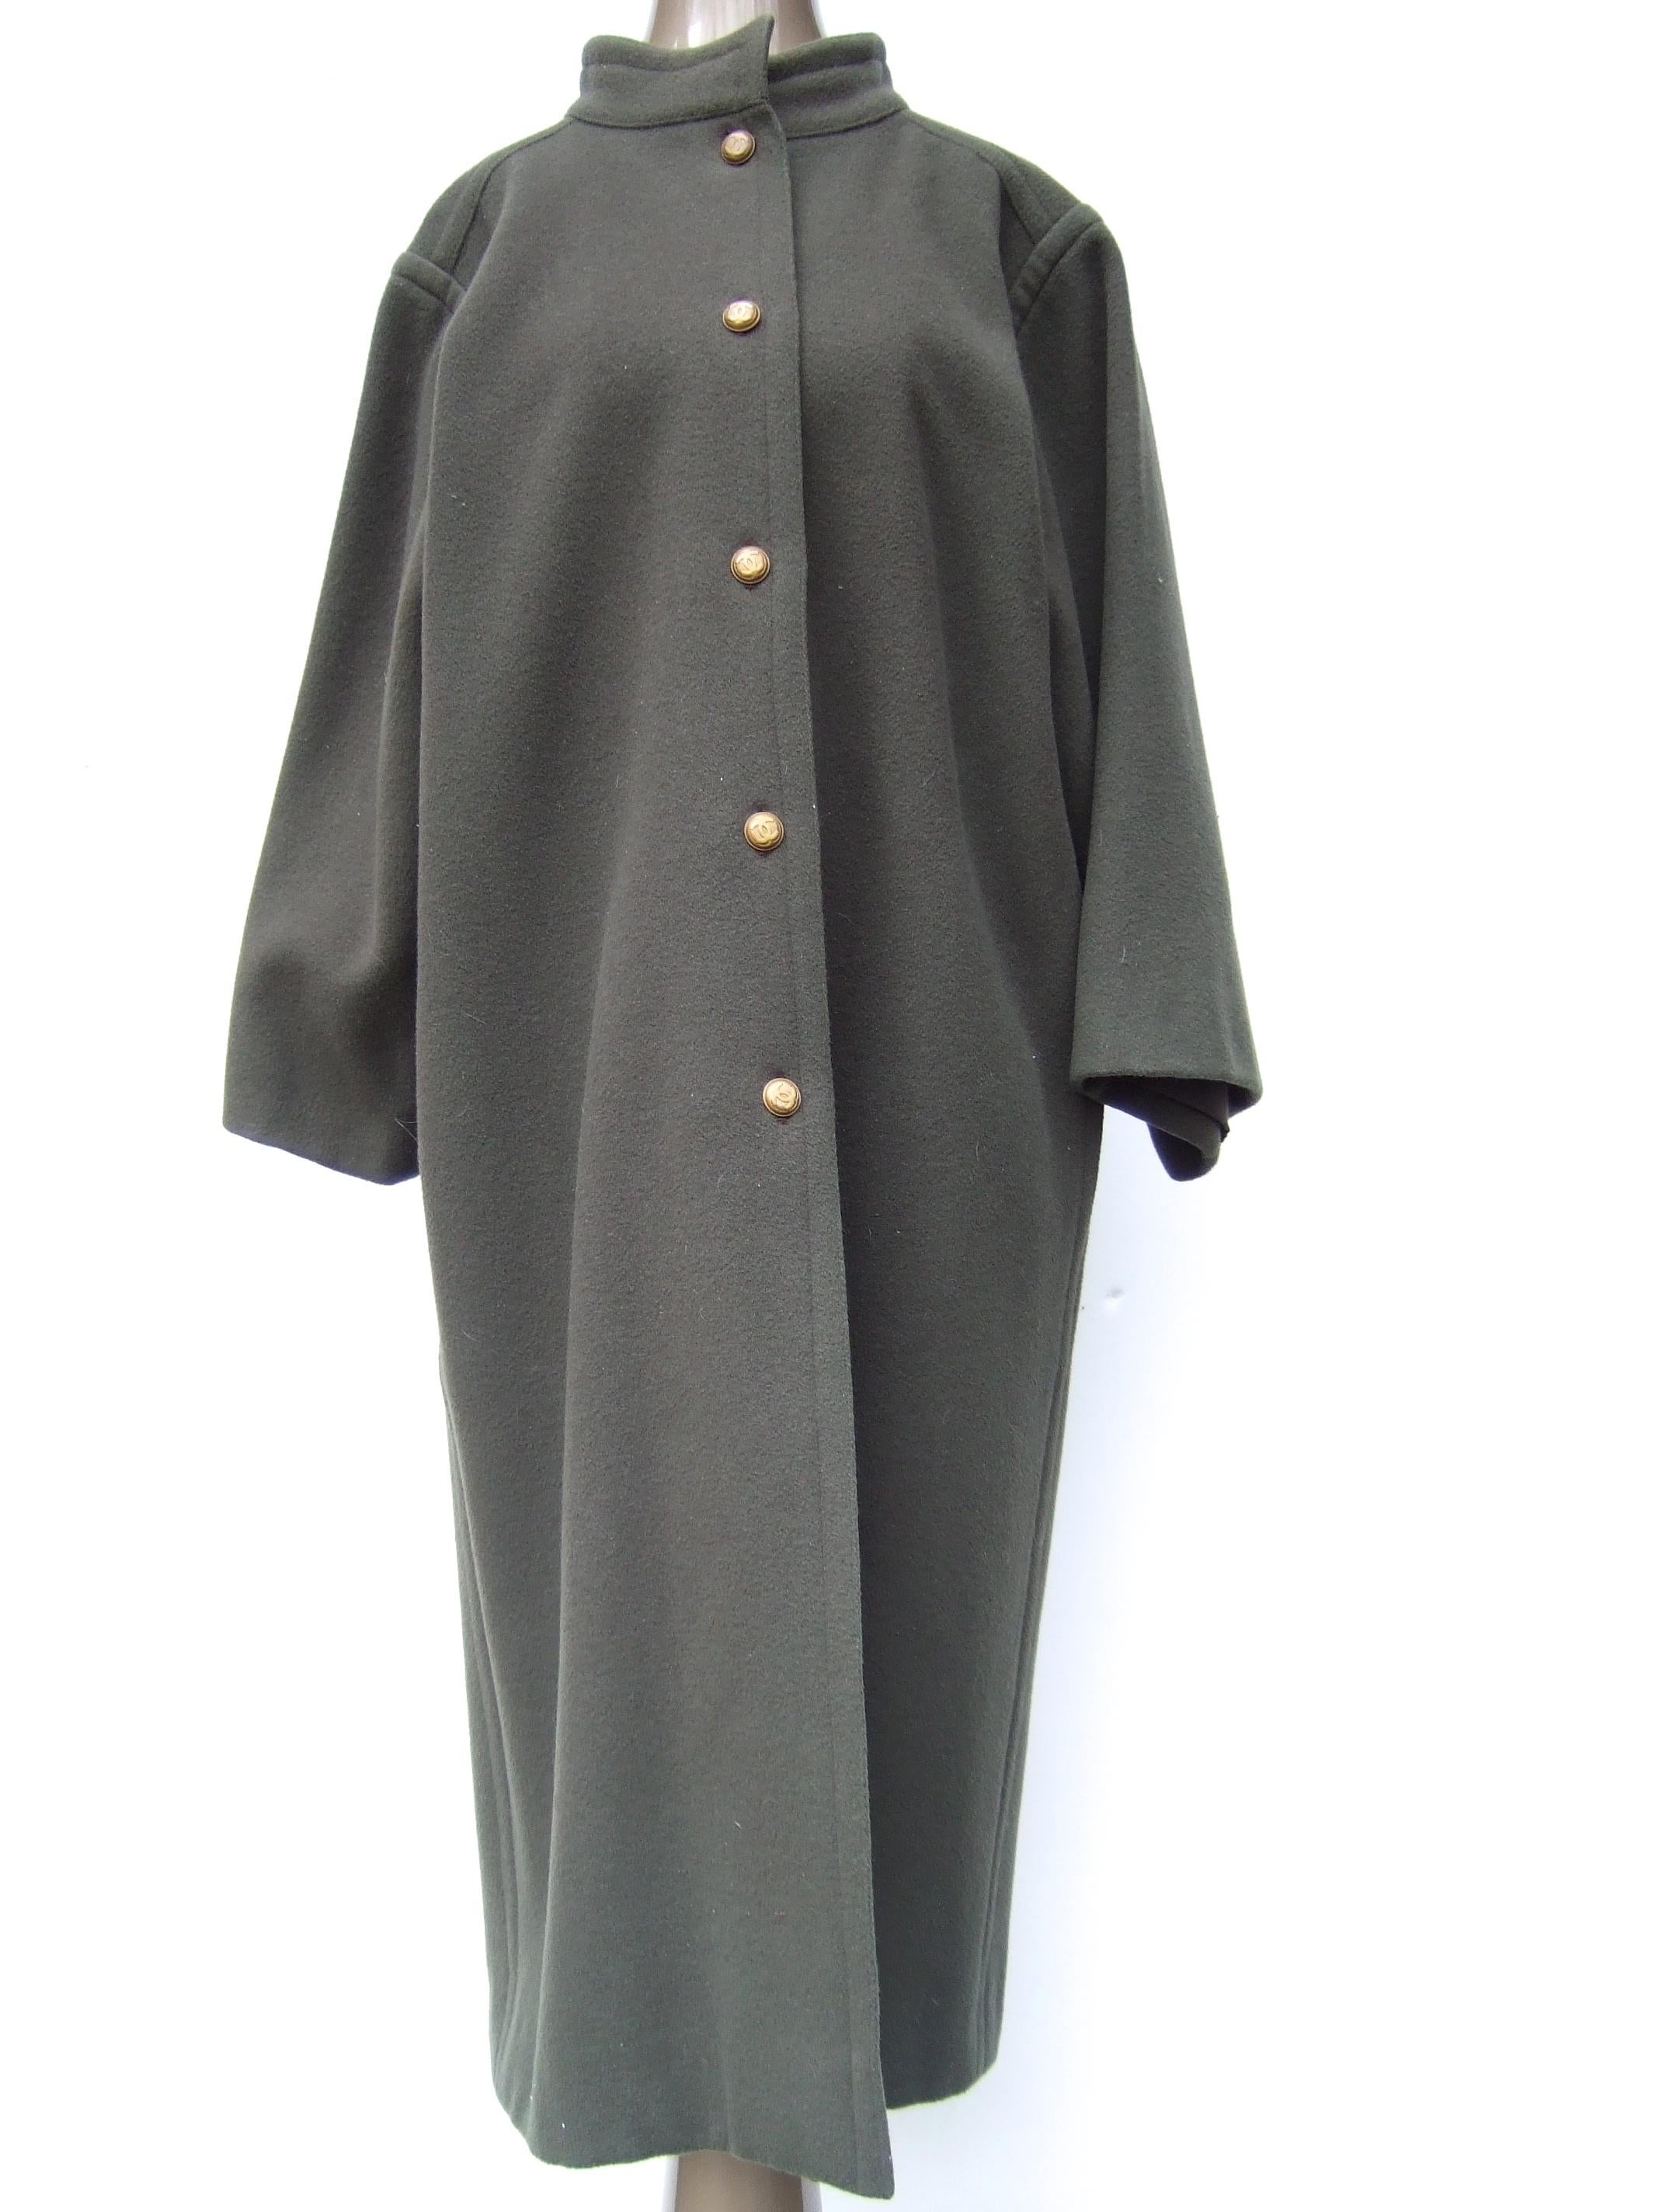 CHANEL Creations Muted Gray - Green Wool Coat with C.C. Buttons c 1980s For Sale 3